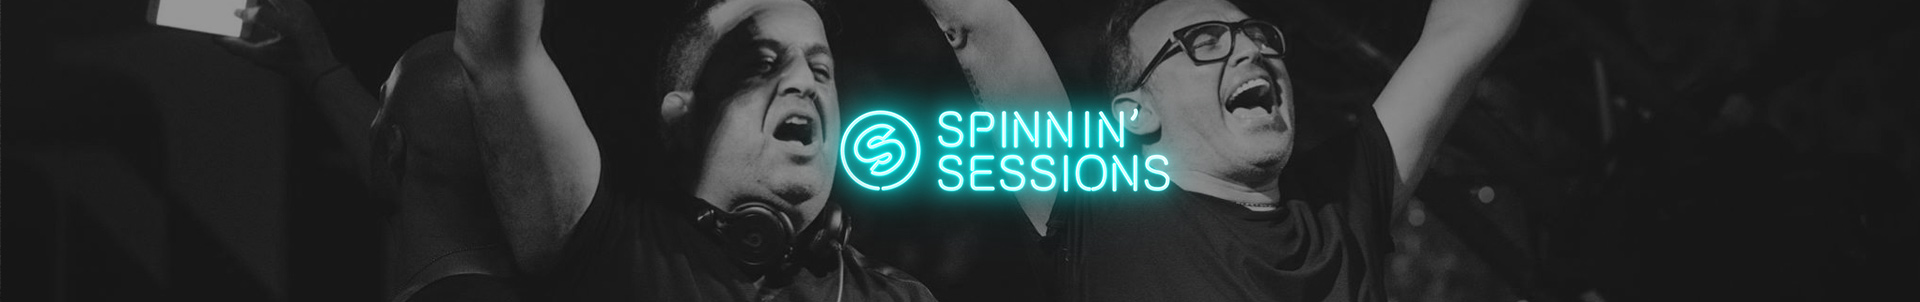 We Rave You premiere: Spinnin' Sessions with a Guest Mix by Nari & Milani